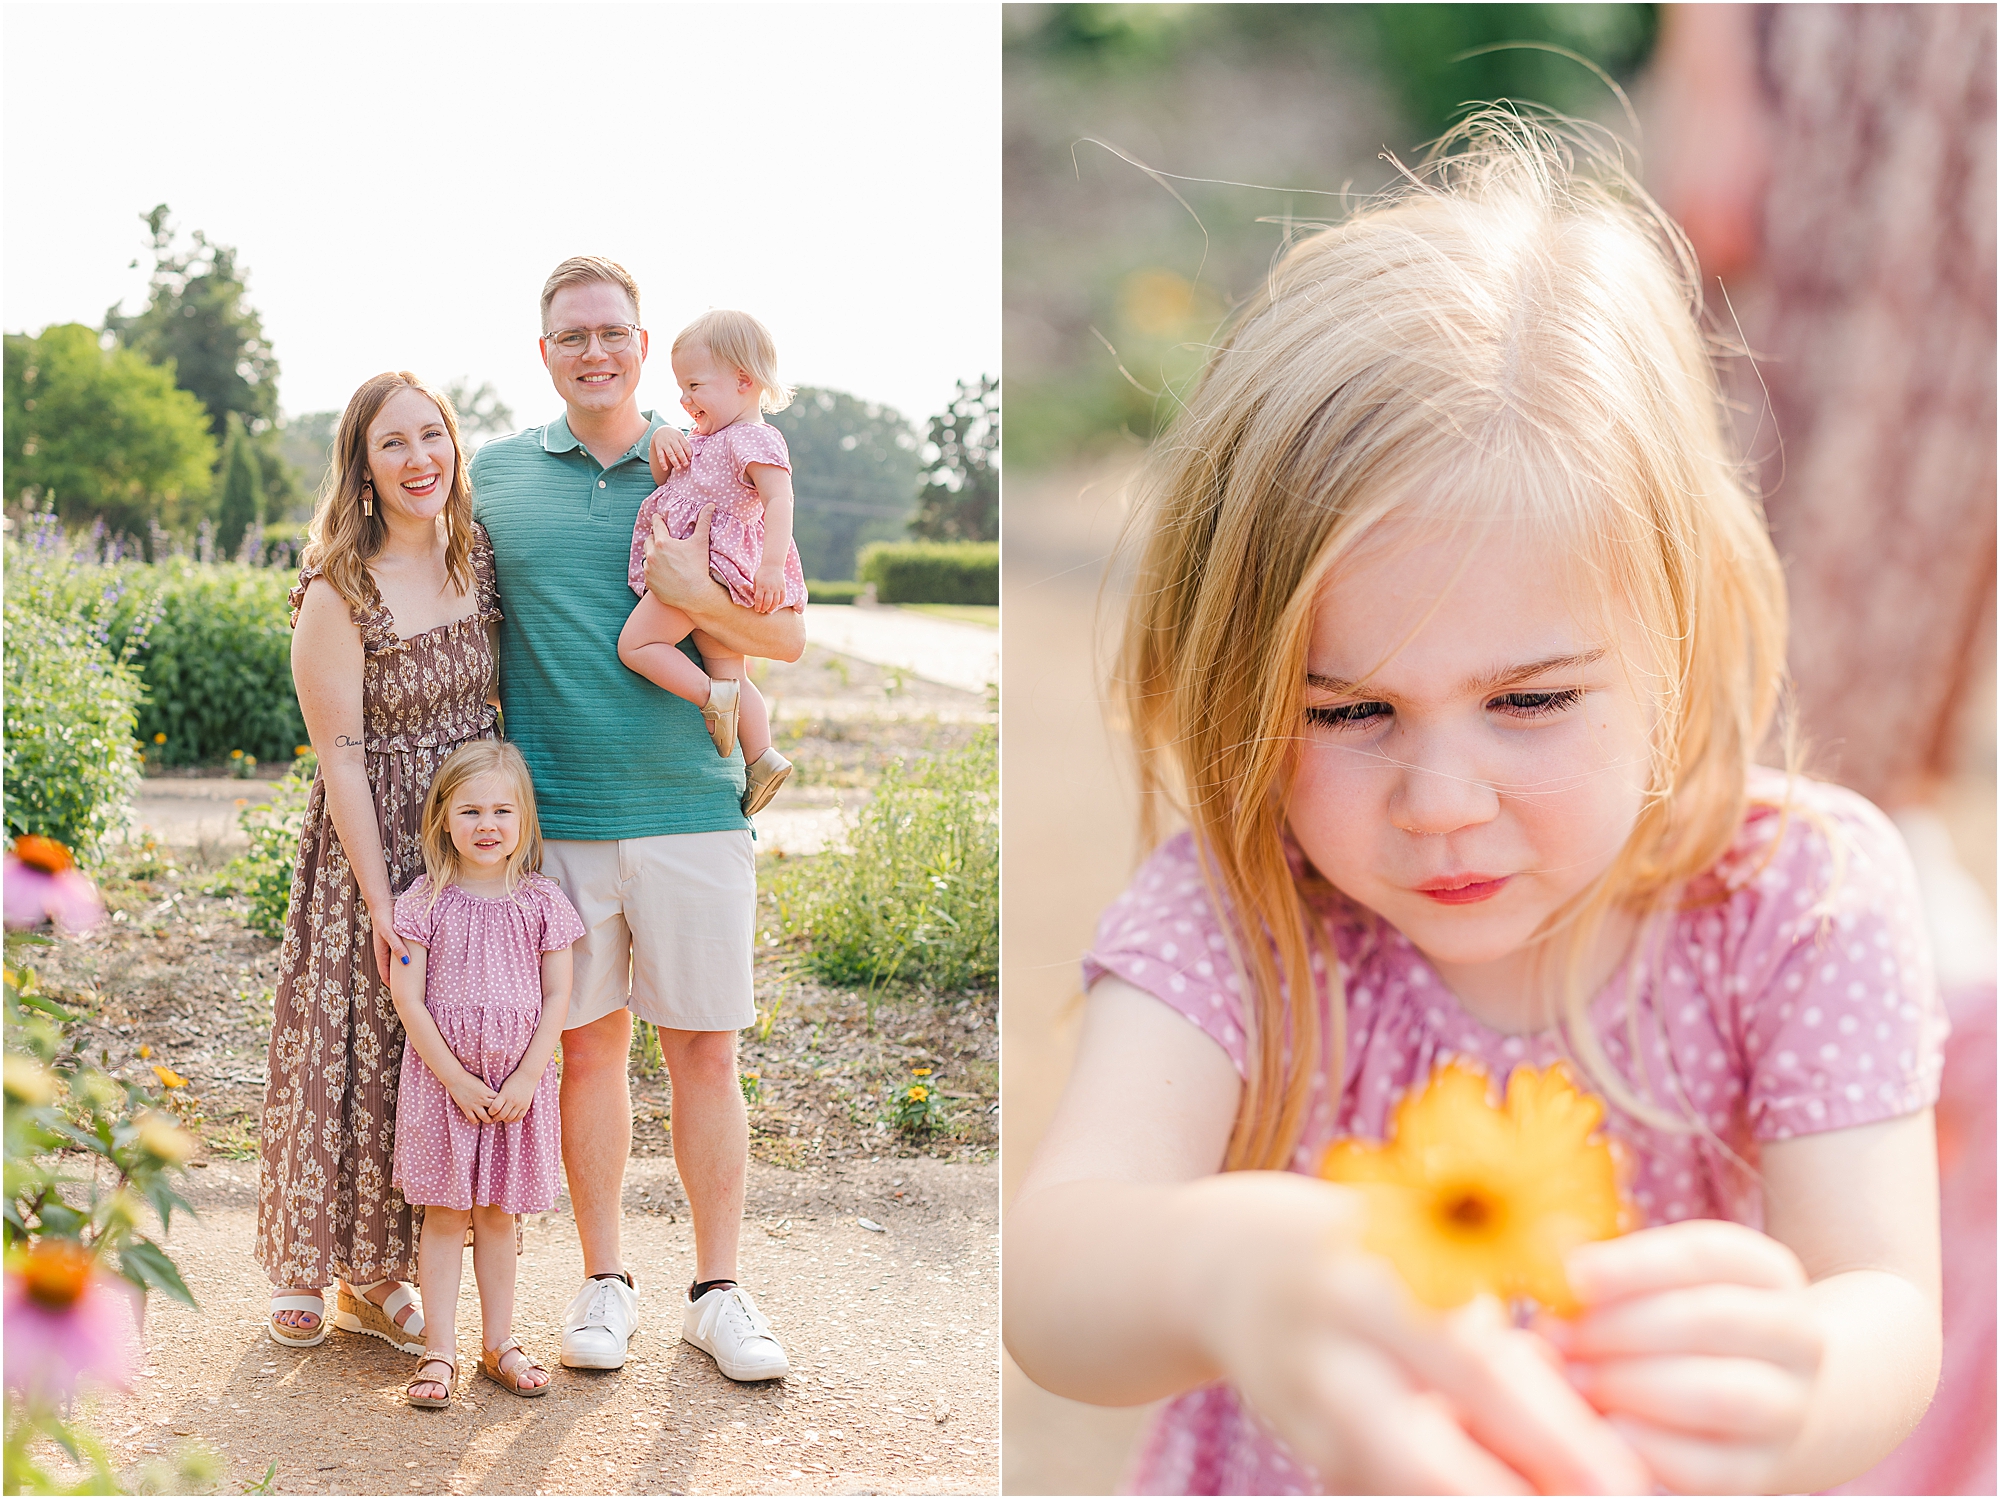 Picking flowers at a summer family session